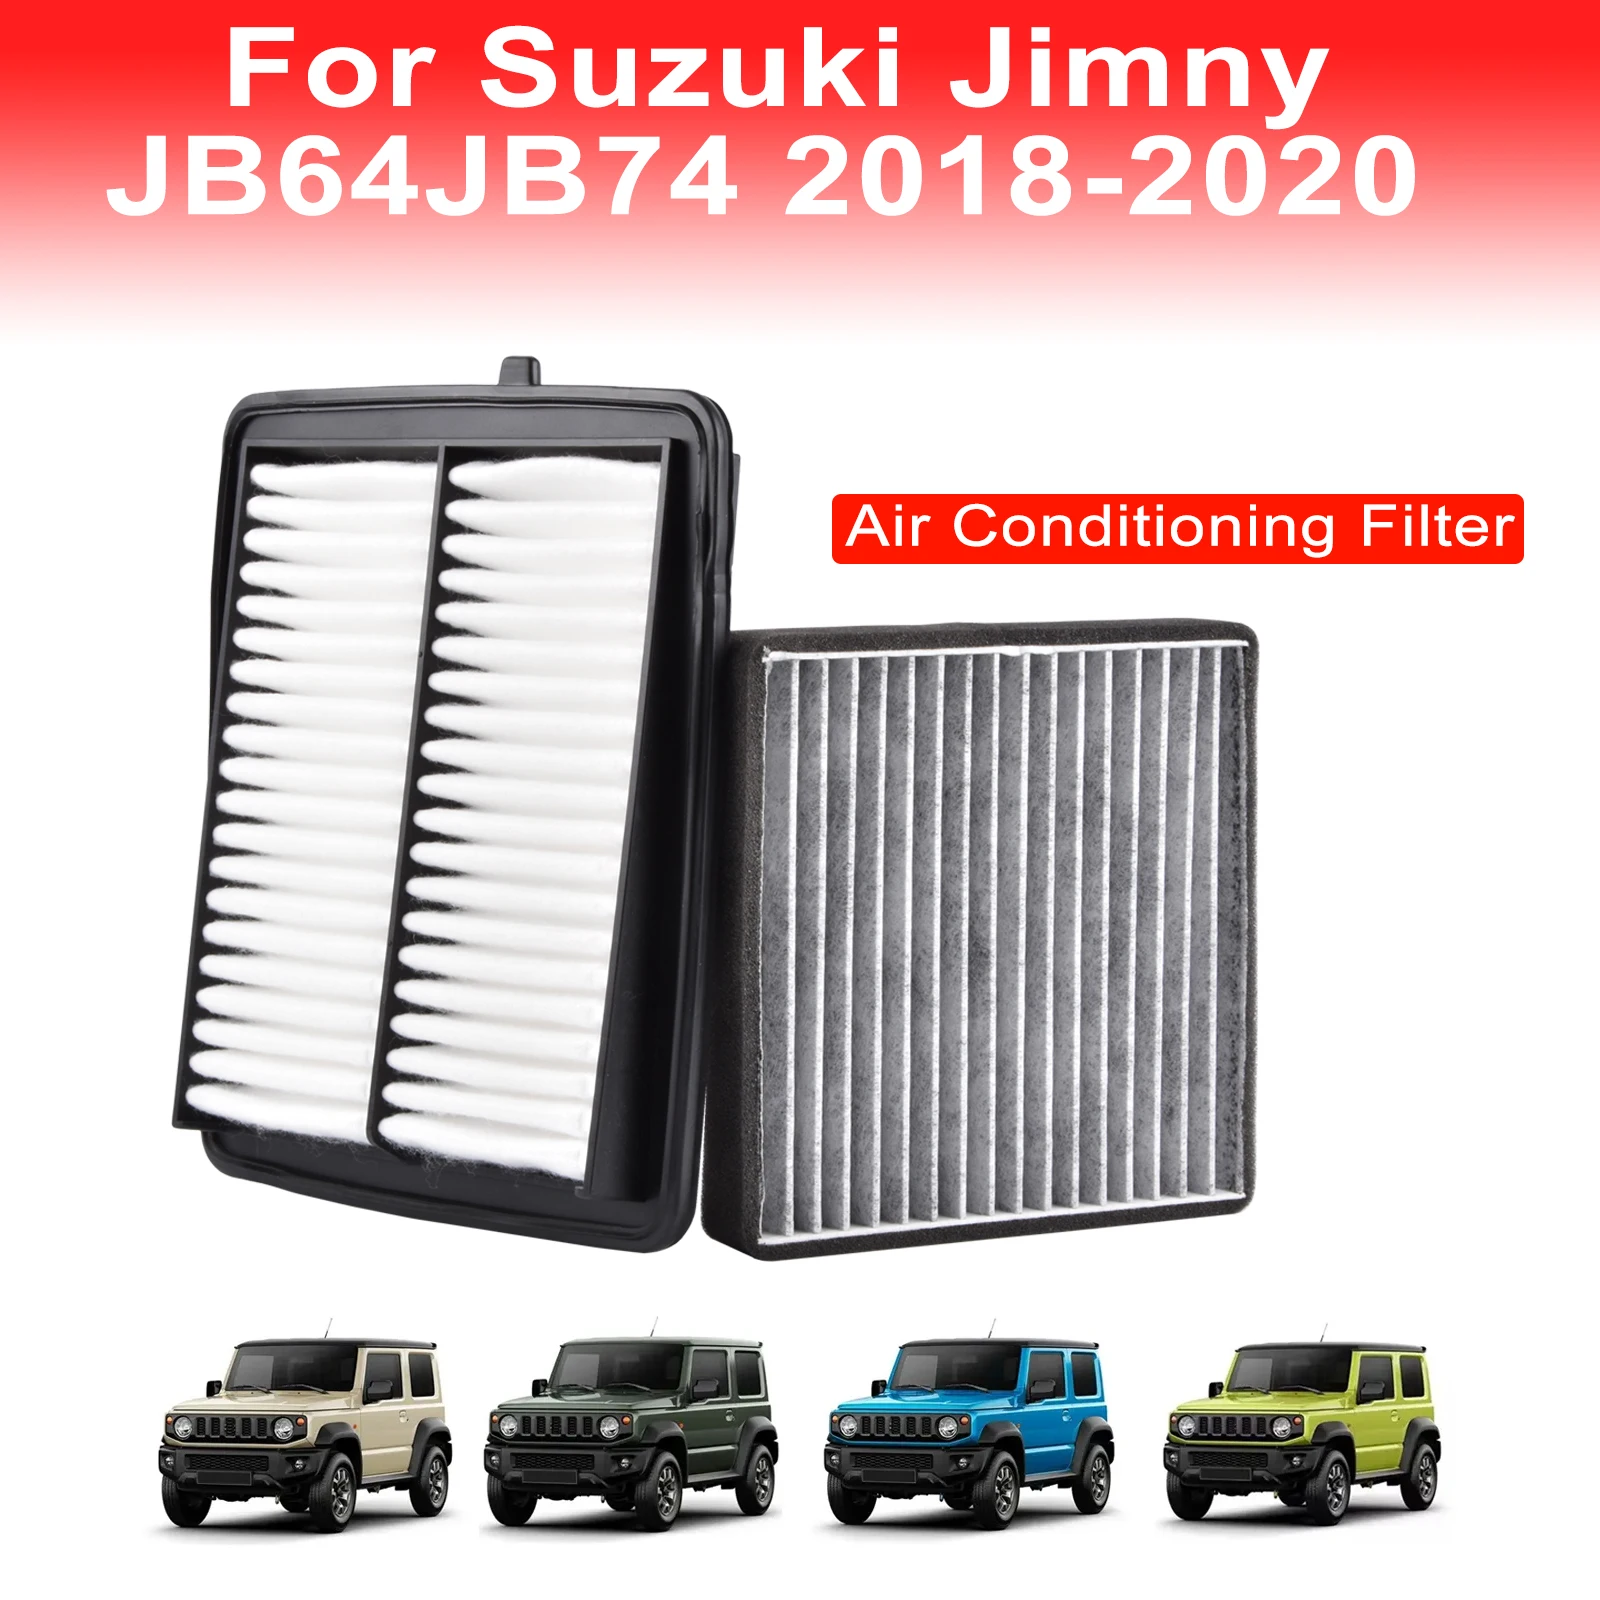 

Interior Replacement For Suzuki Jimny JB64 JB74 2019-2021 Car Air Filter Air Conditioning Filter Activated Carbon Particles